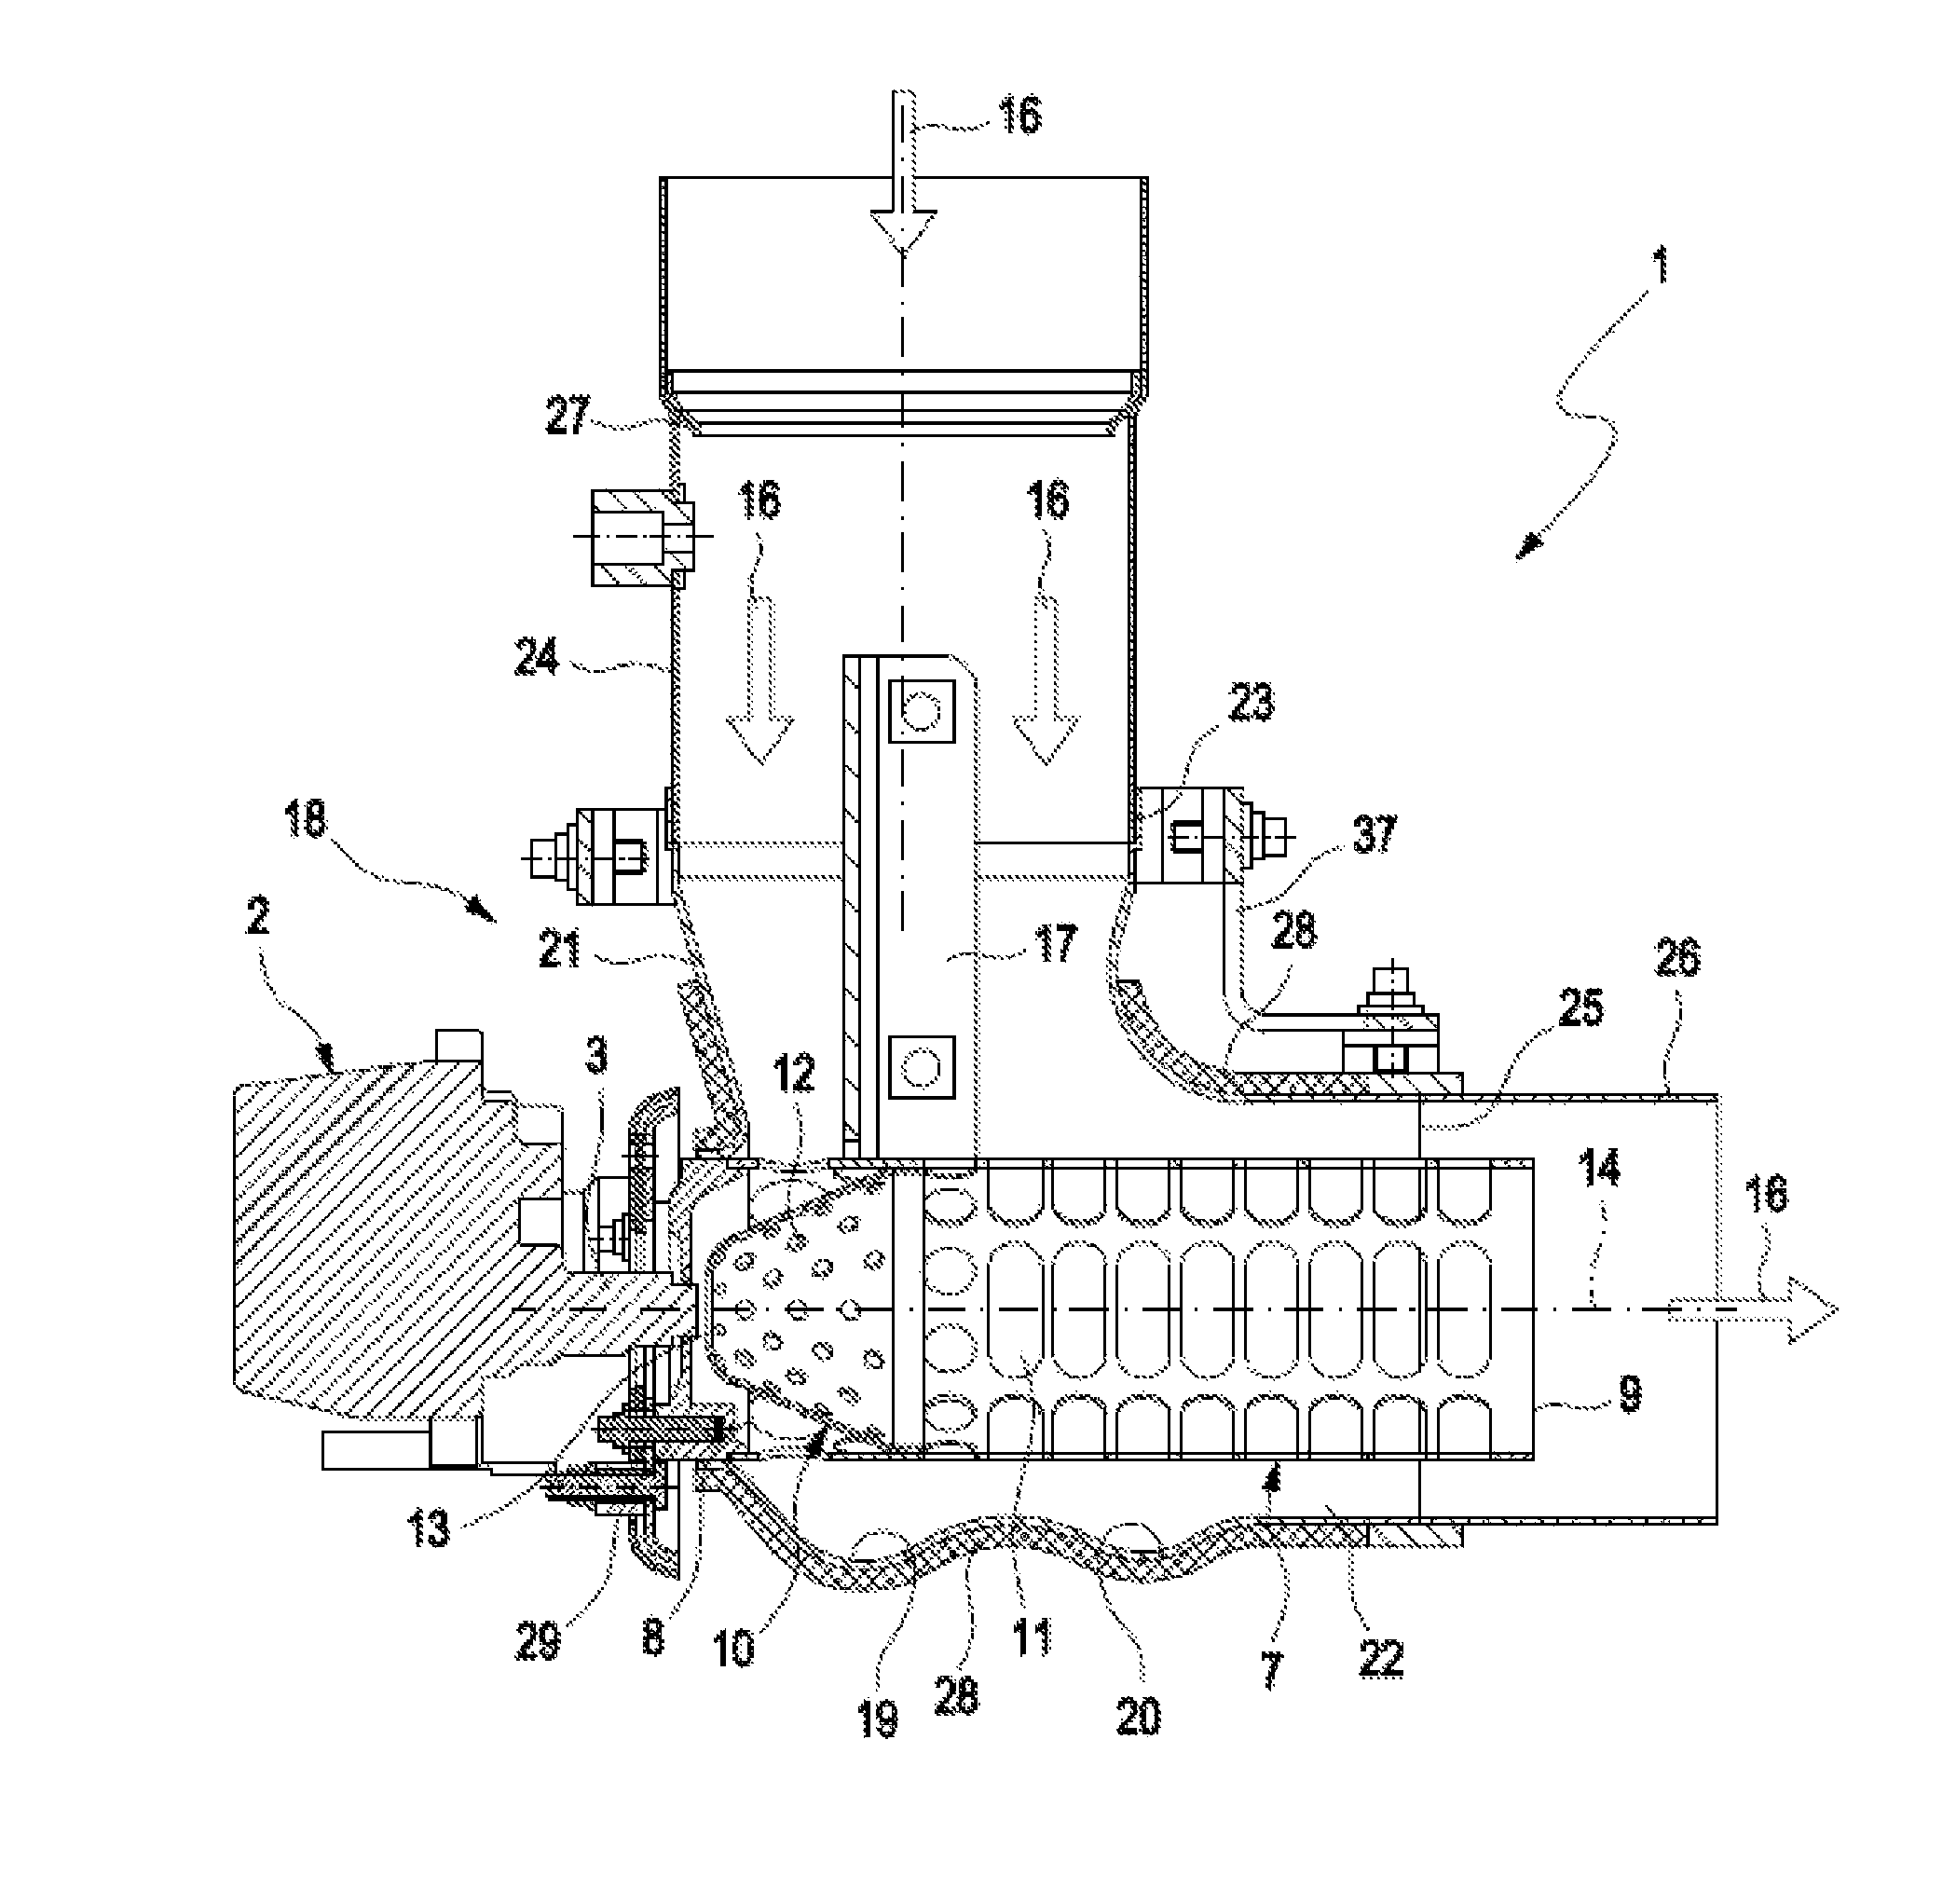 System for adding and processing reducing agent in a motor vehicle